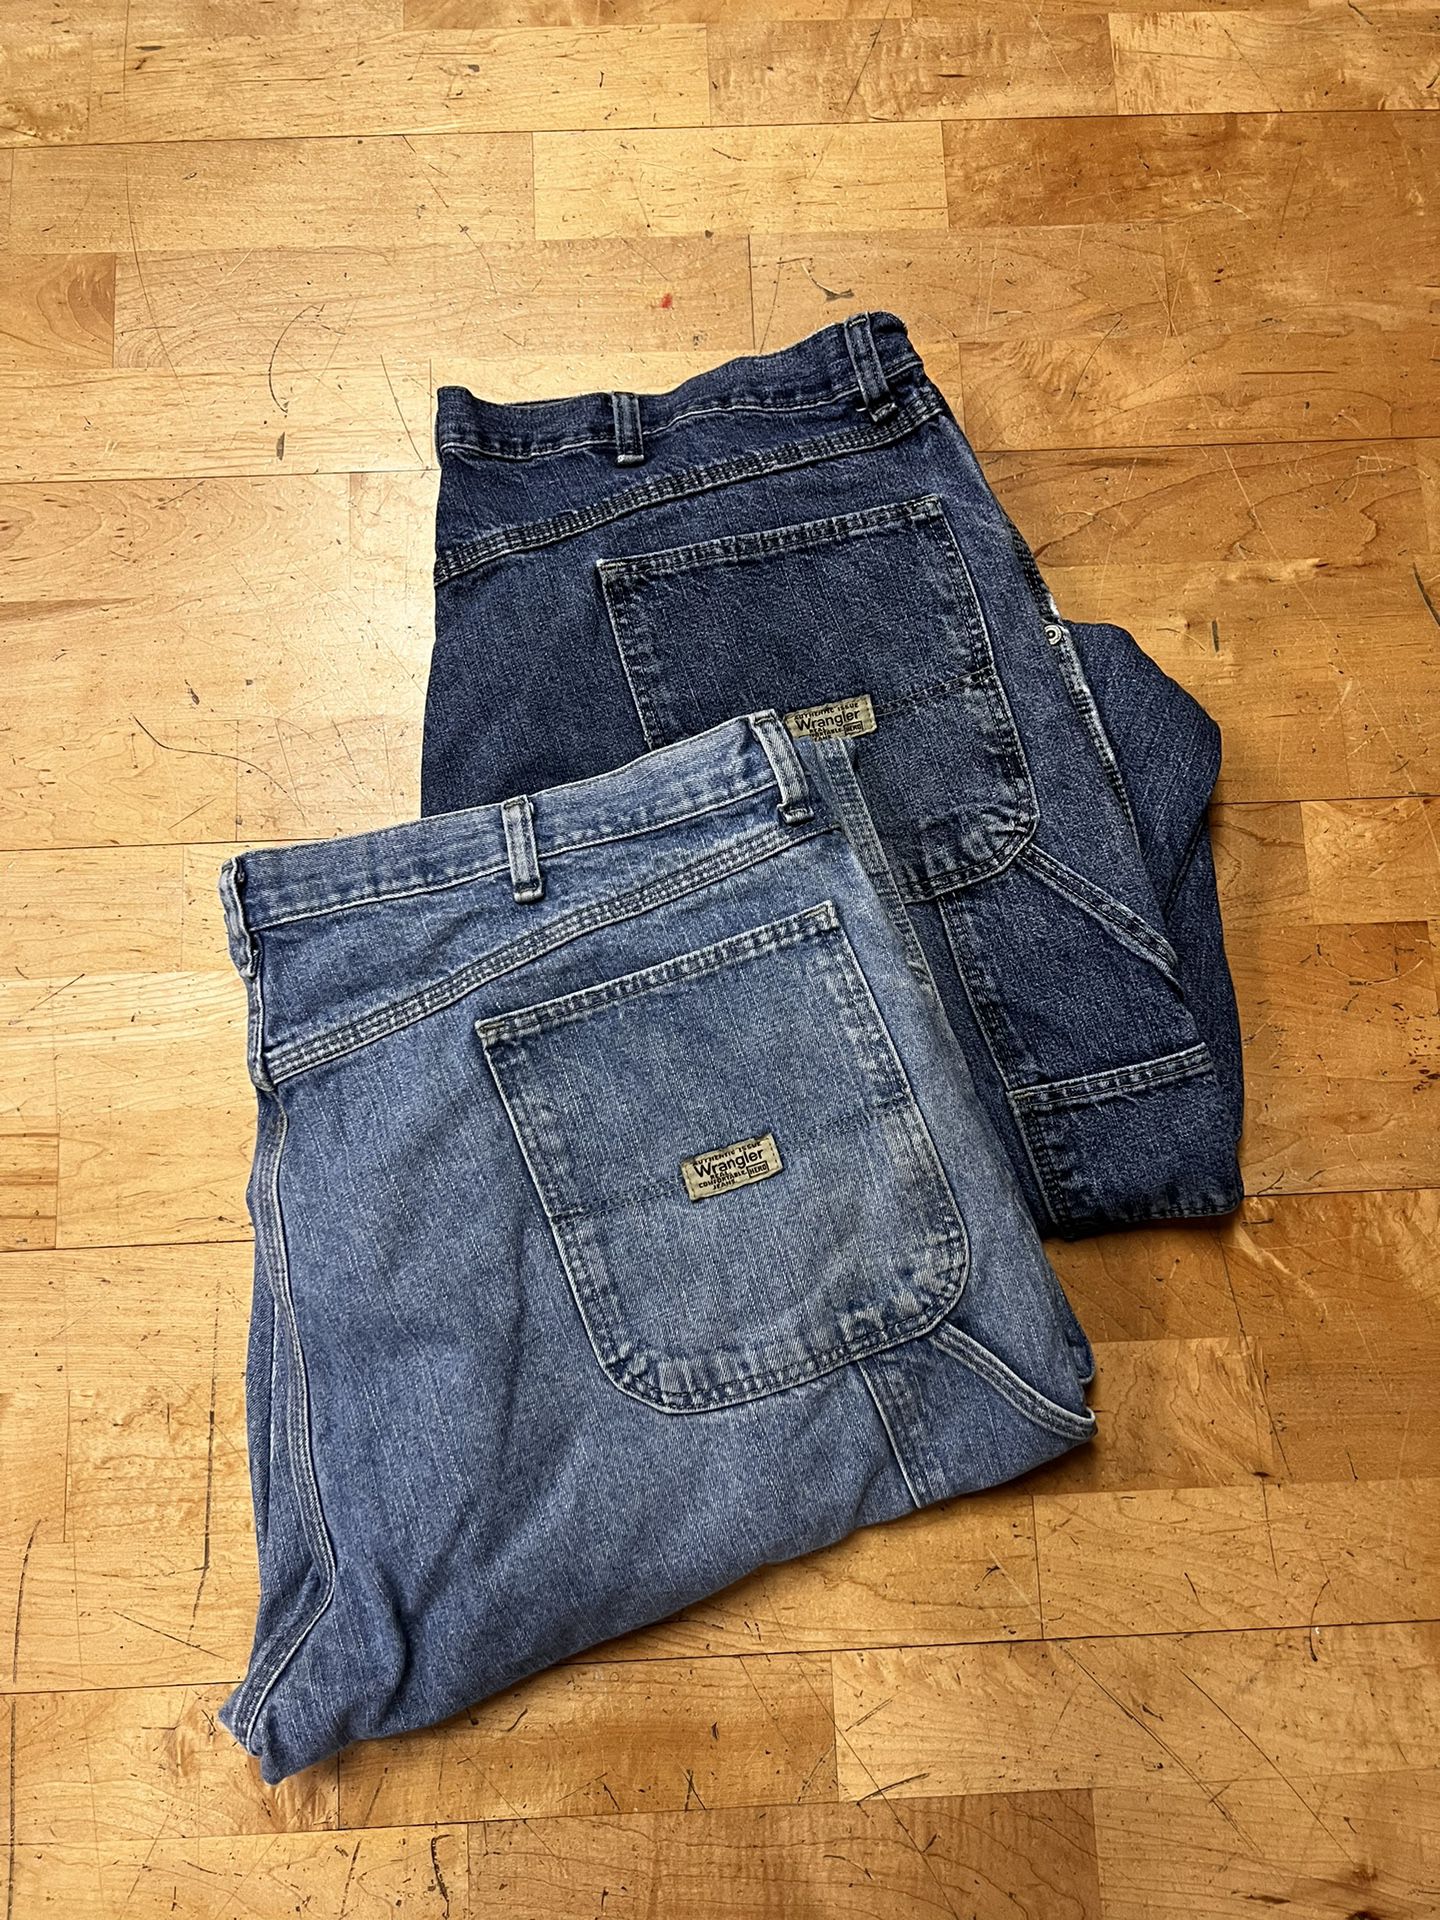 Wranglers 40x32 Mens Carpenter Work Jeans for Sale in Federal Way, WA ...